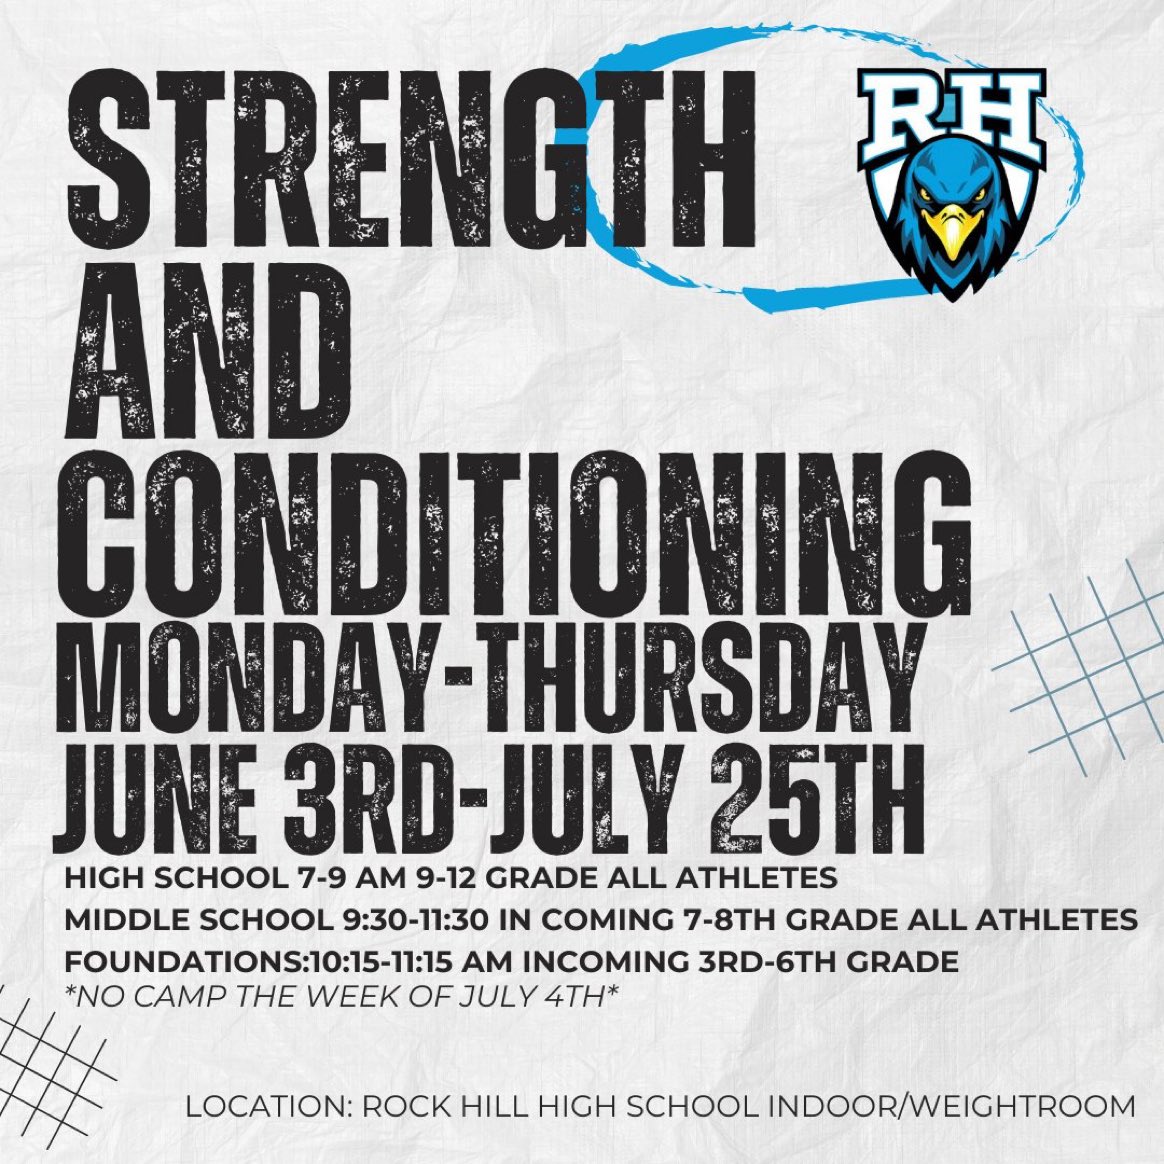 Strength and Conditioning Camp is 2 weeks away. Still plenty of time to sign up! @RockHillHS prosperisd.store.rankone.com/high-school-st… (High School Sign up Link) prosperisd.store.rankone.com/middle-school-… (Middle School Sign up Link) prosperisd.store.rankone.com/foundations-of… (Foundations Sign up Link)